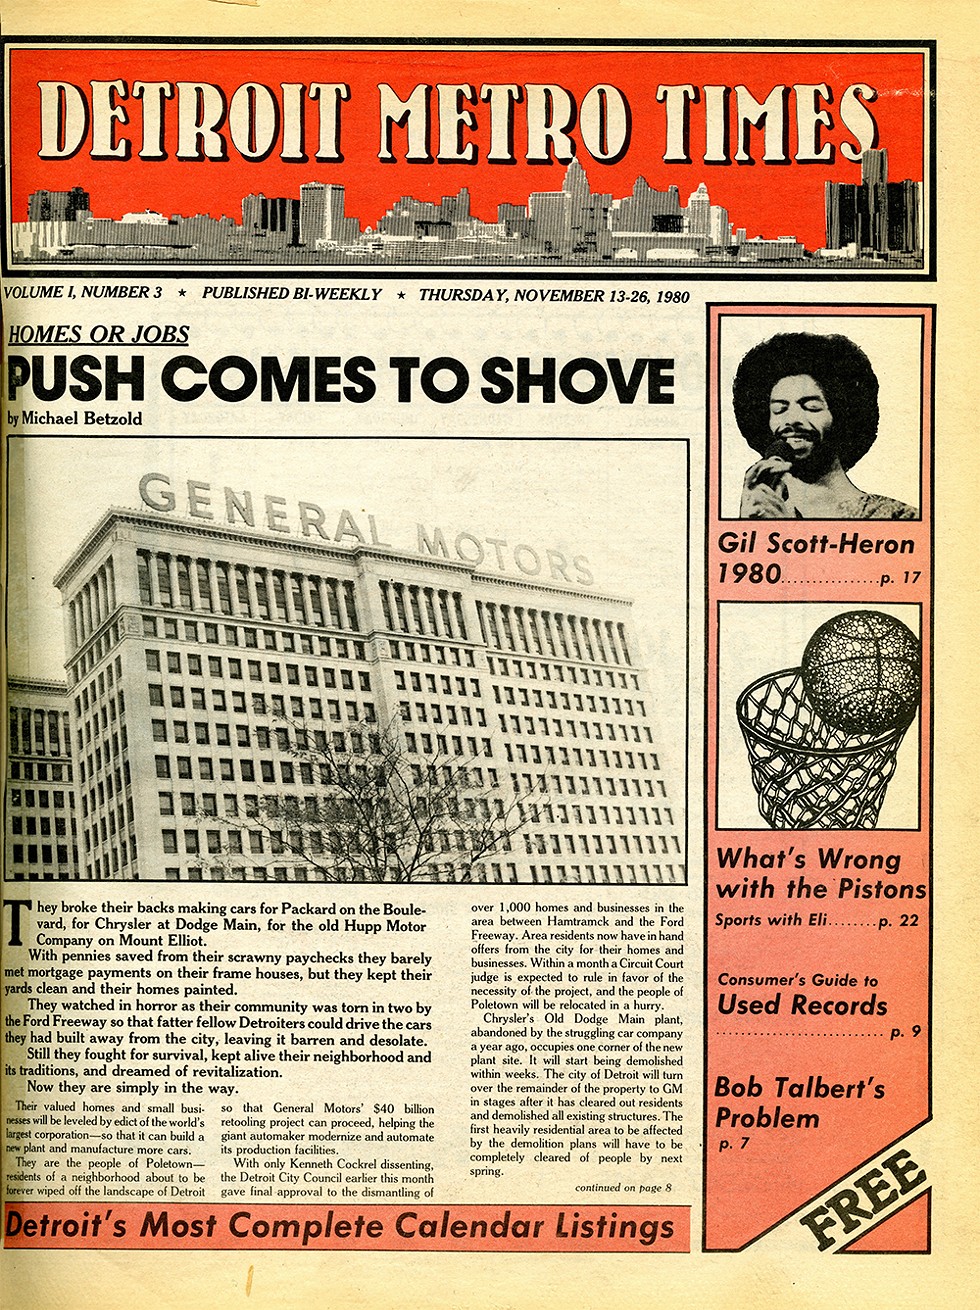 40 ways Metro Times changed Detroit (and beyond) over the past 40 years